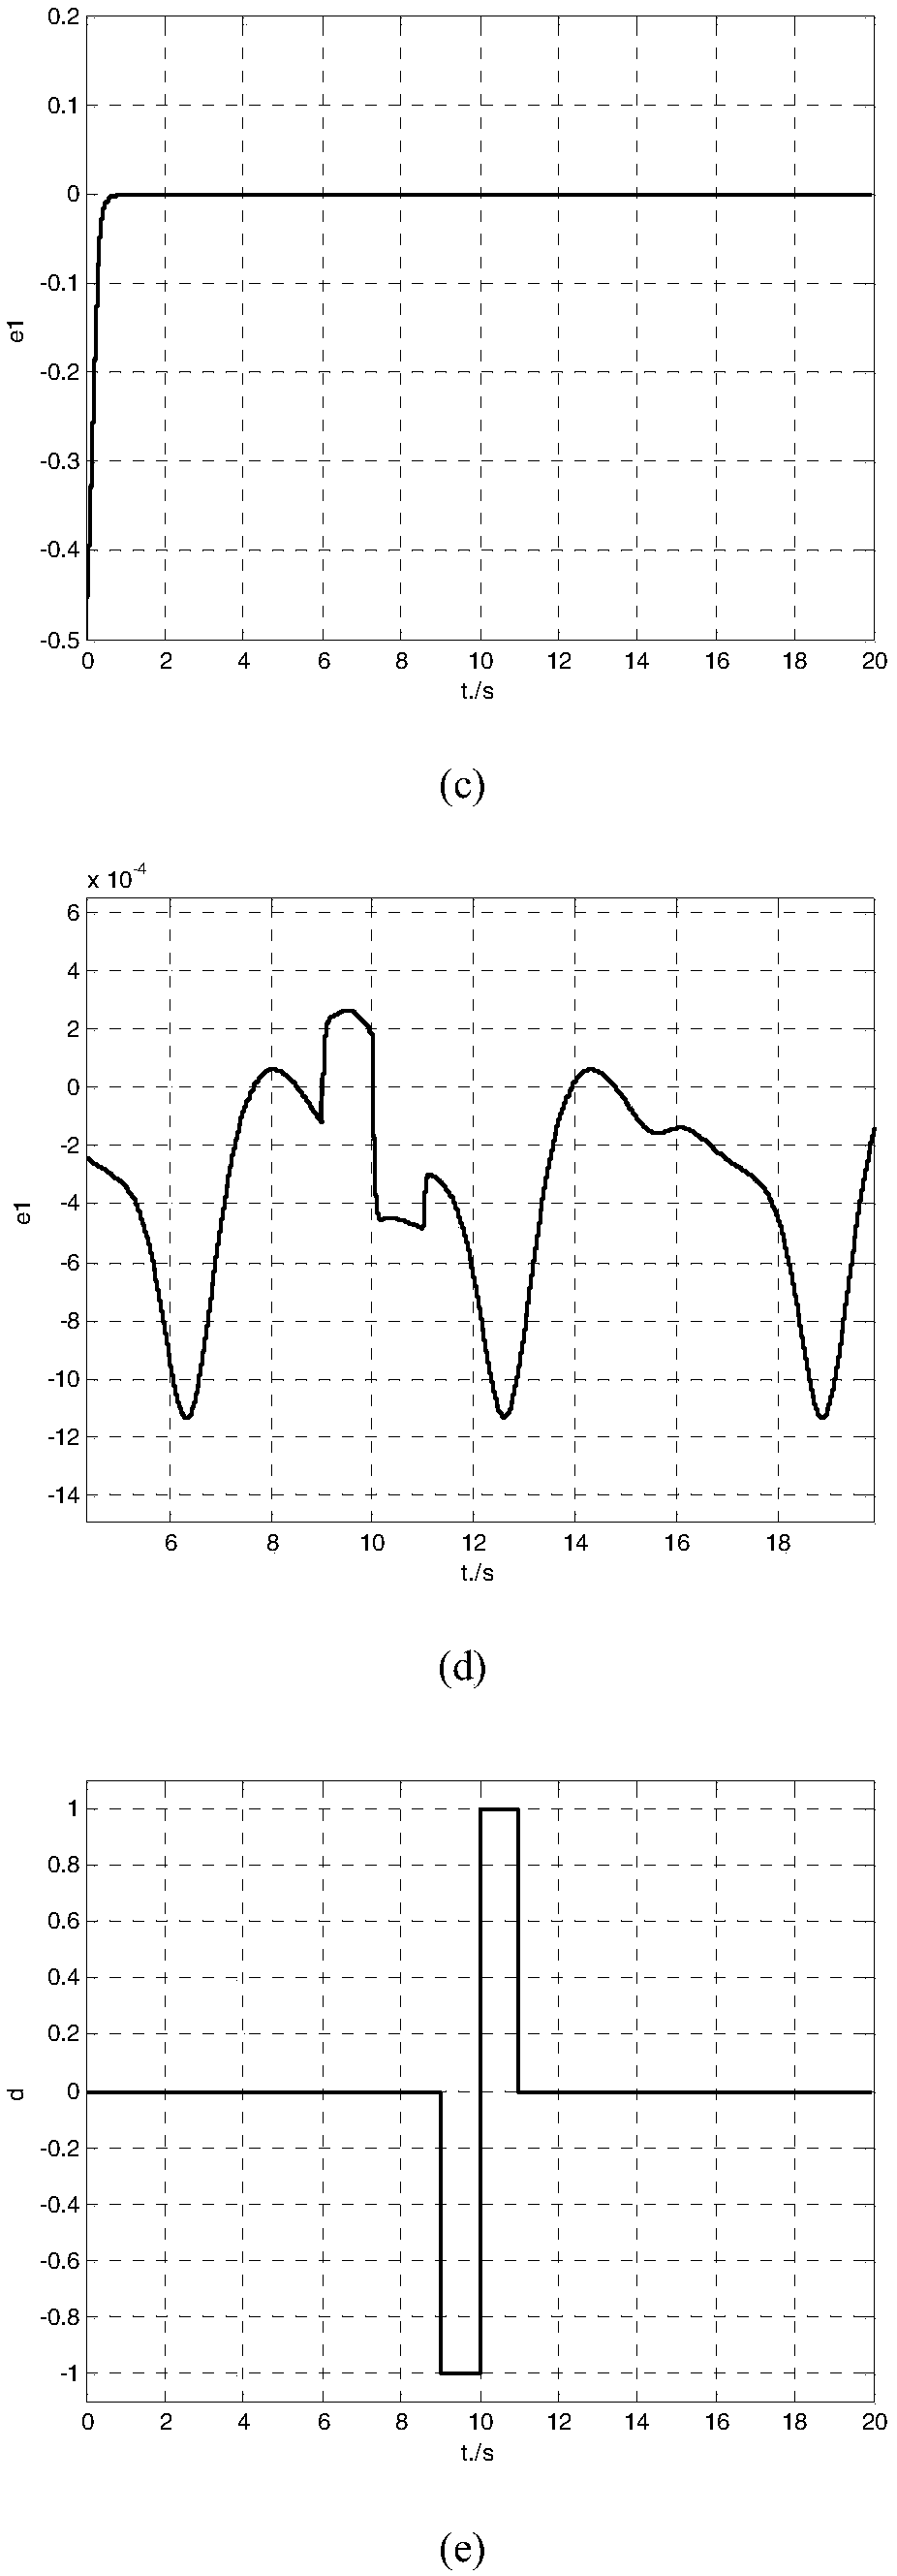 Two-speed adaptive proportional-derivative control method